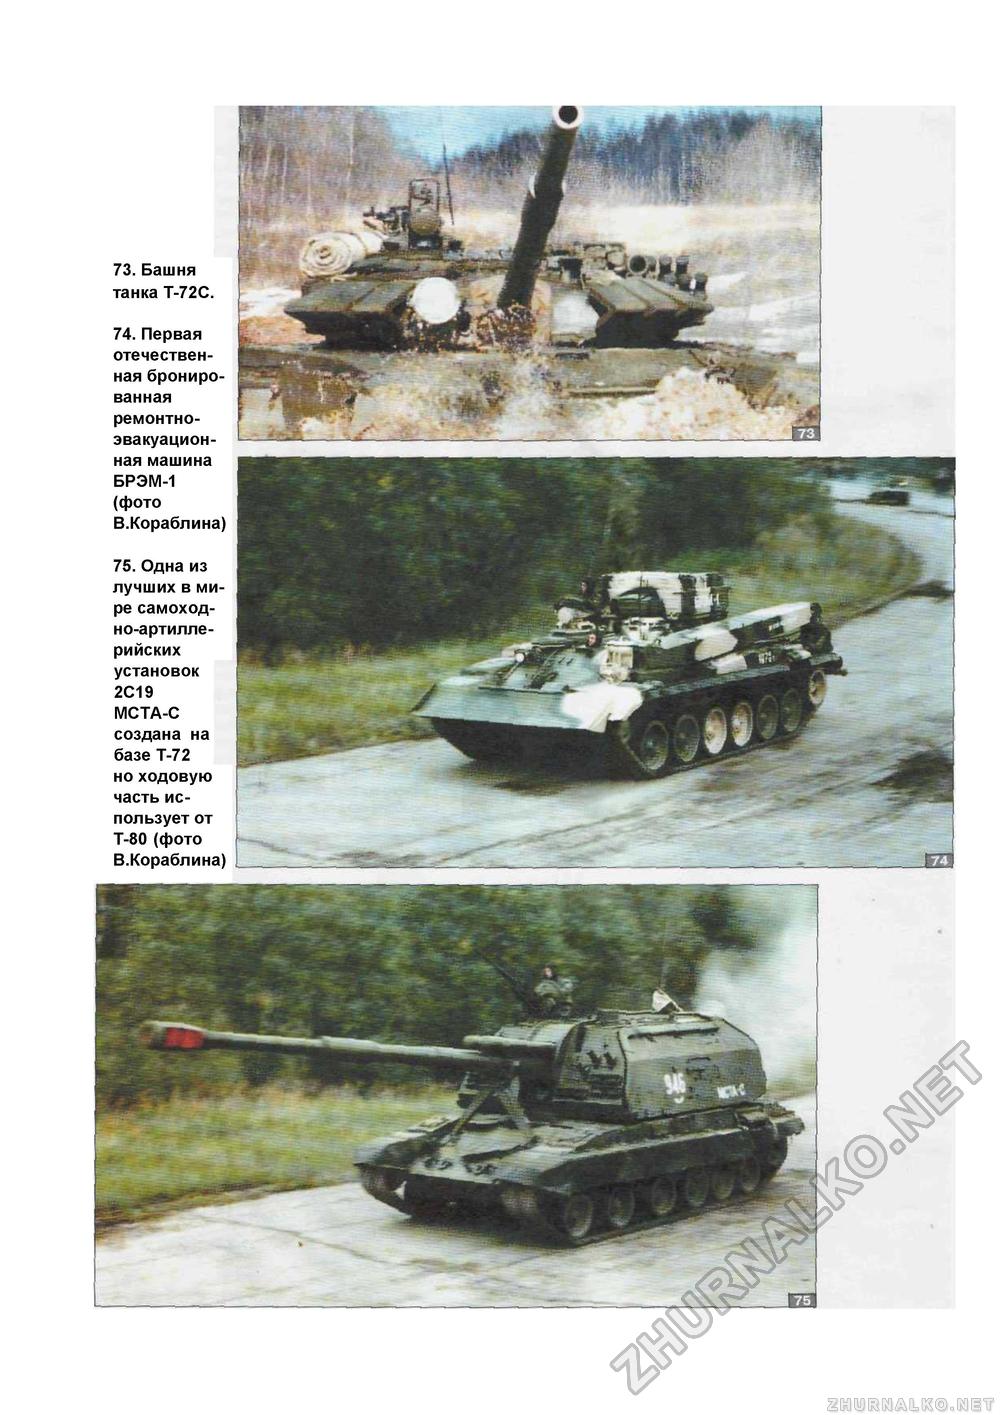  Special -  T-72,  48